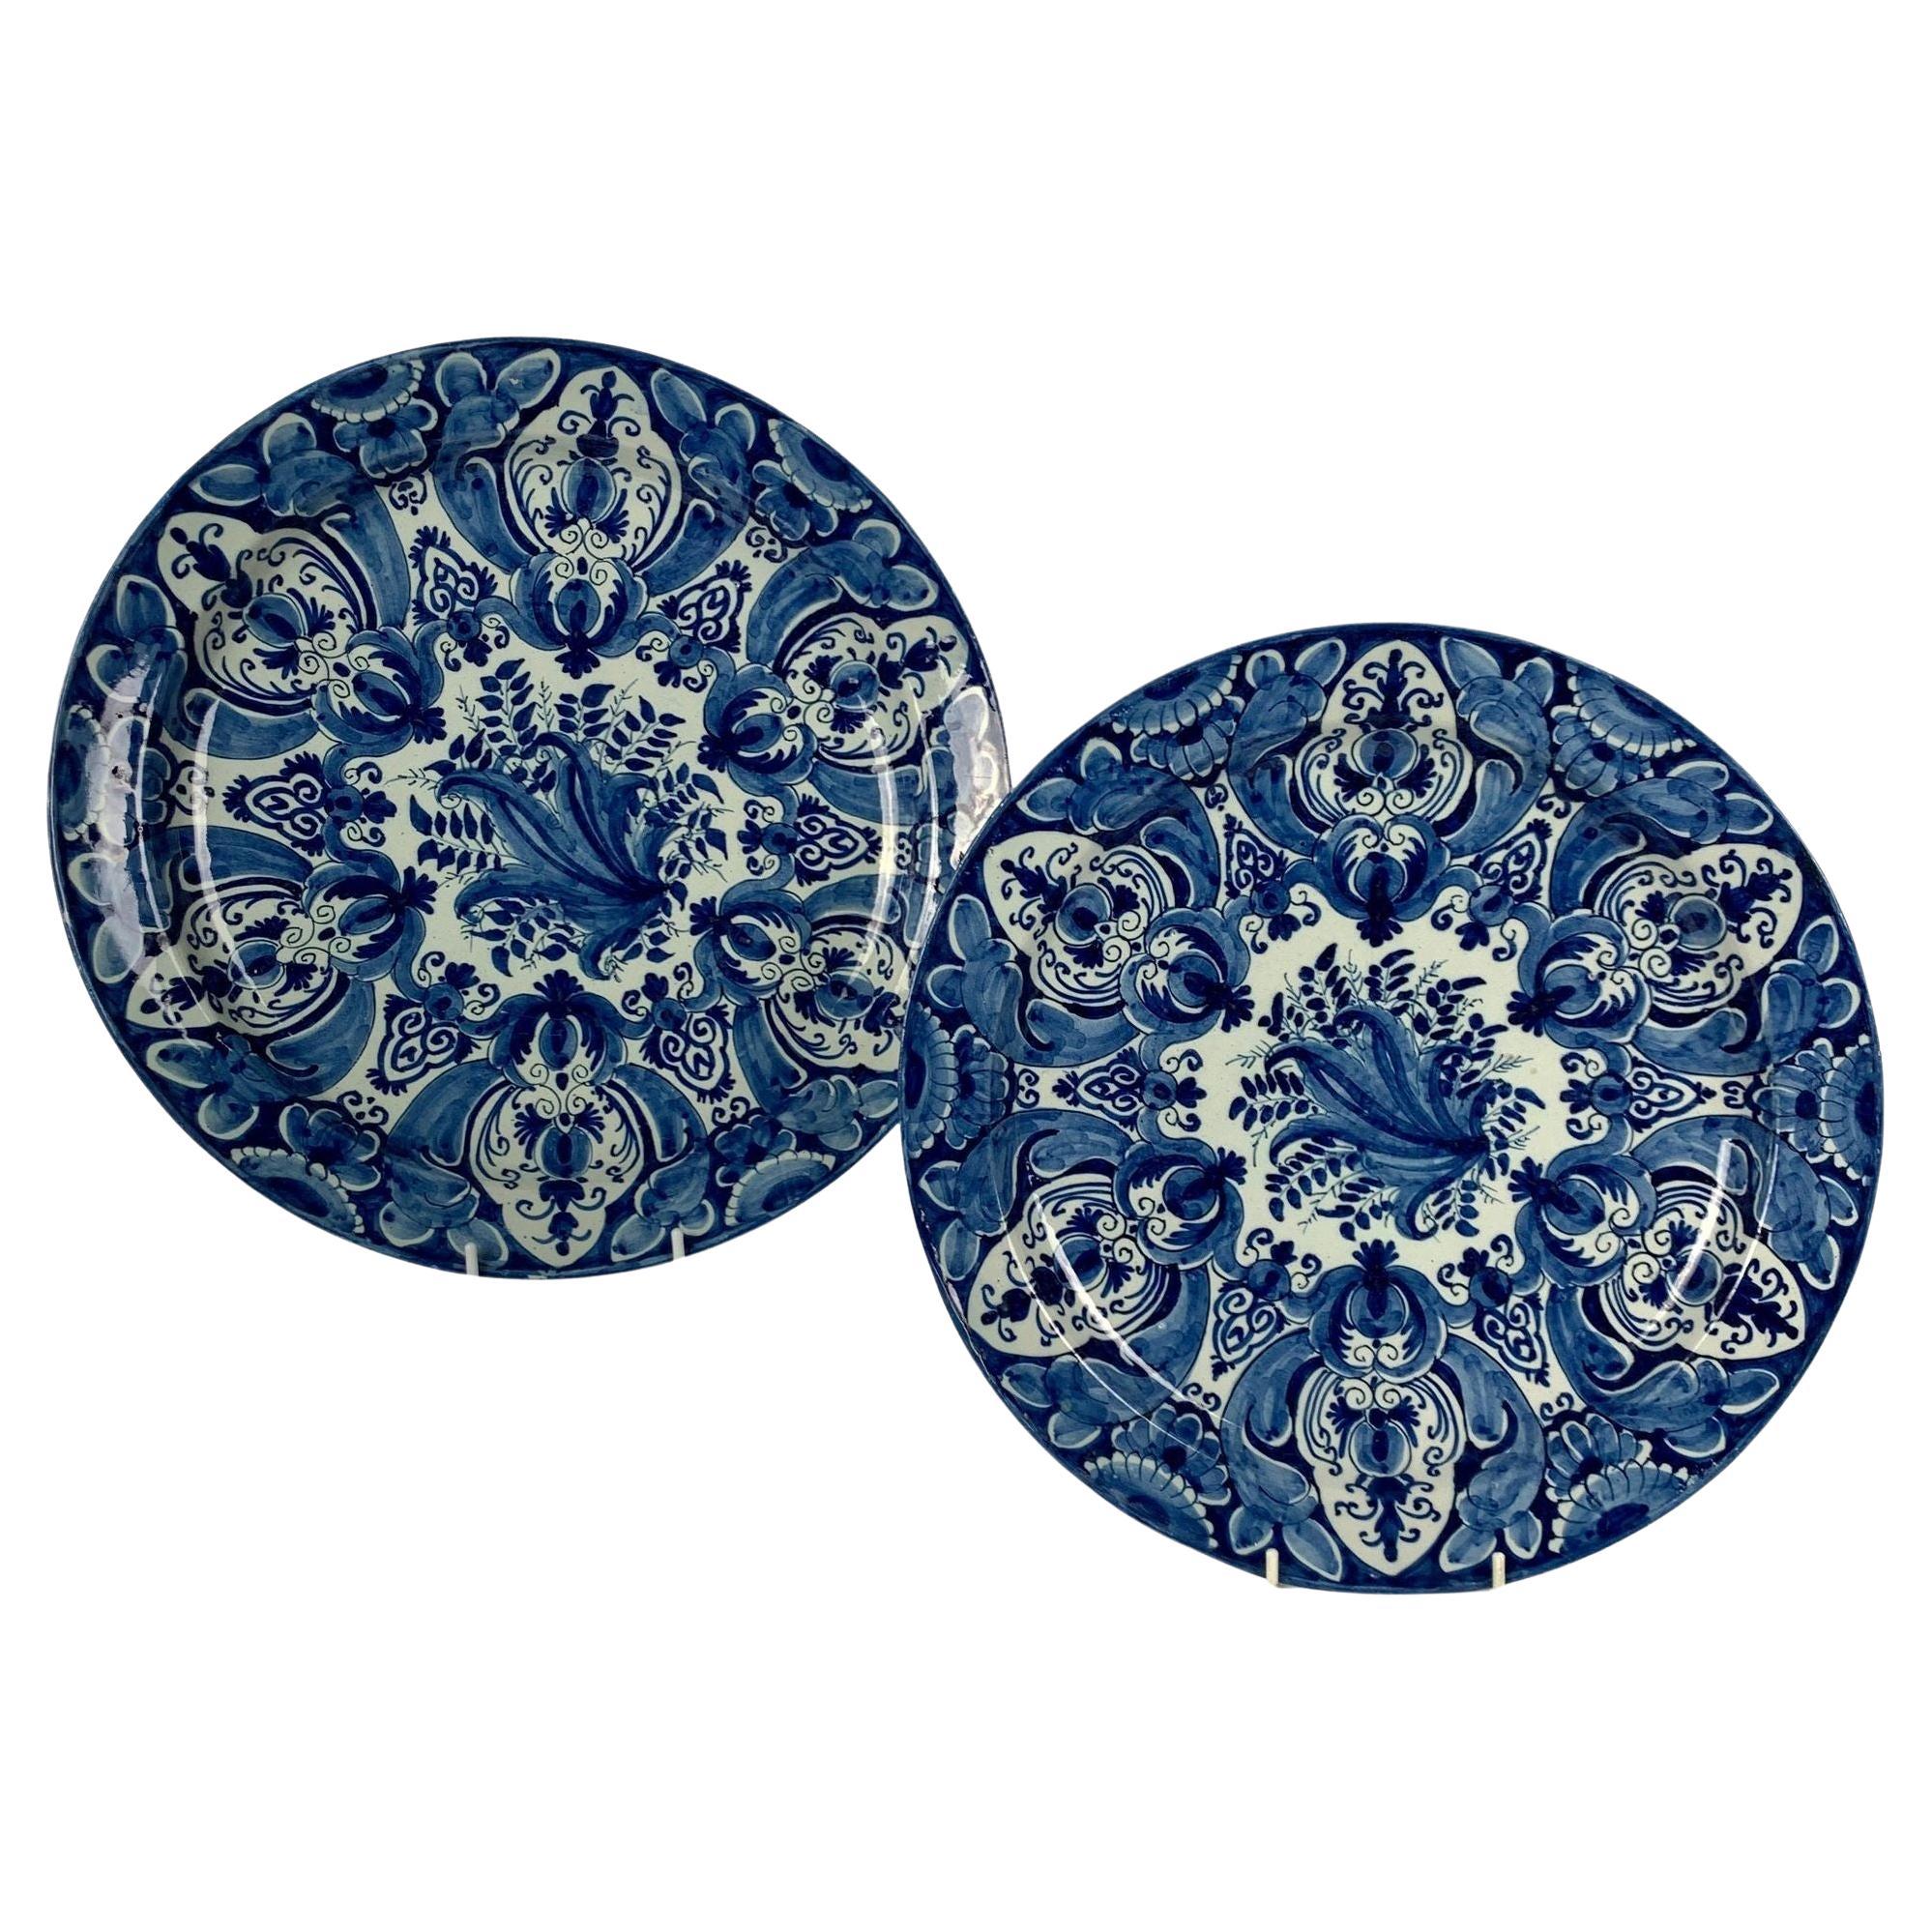 Pair of Large Blue and White Delft Chargers Made Early 18th Century Circa 1710